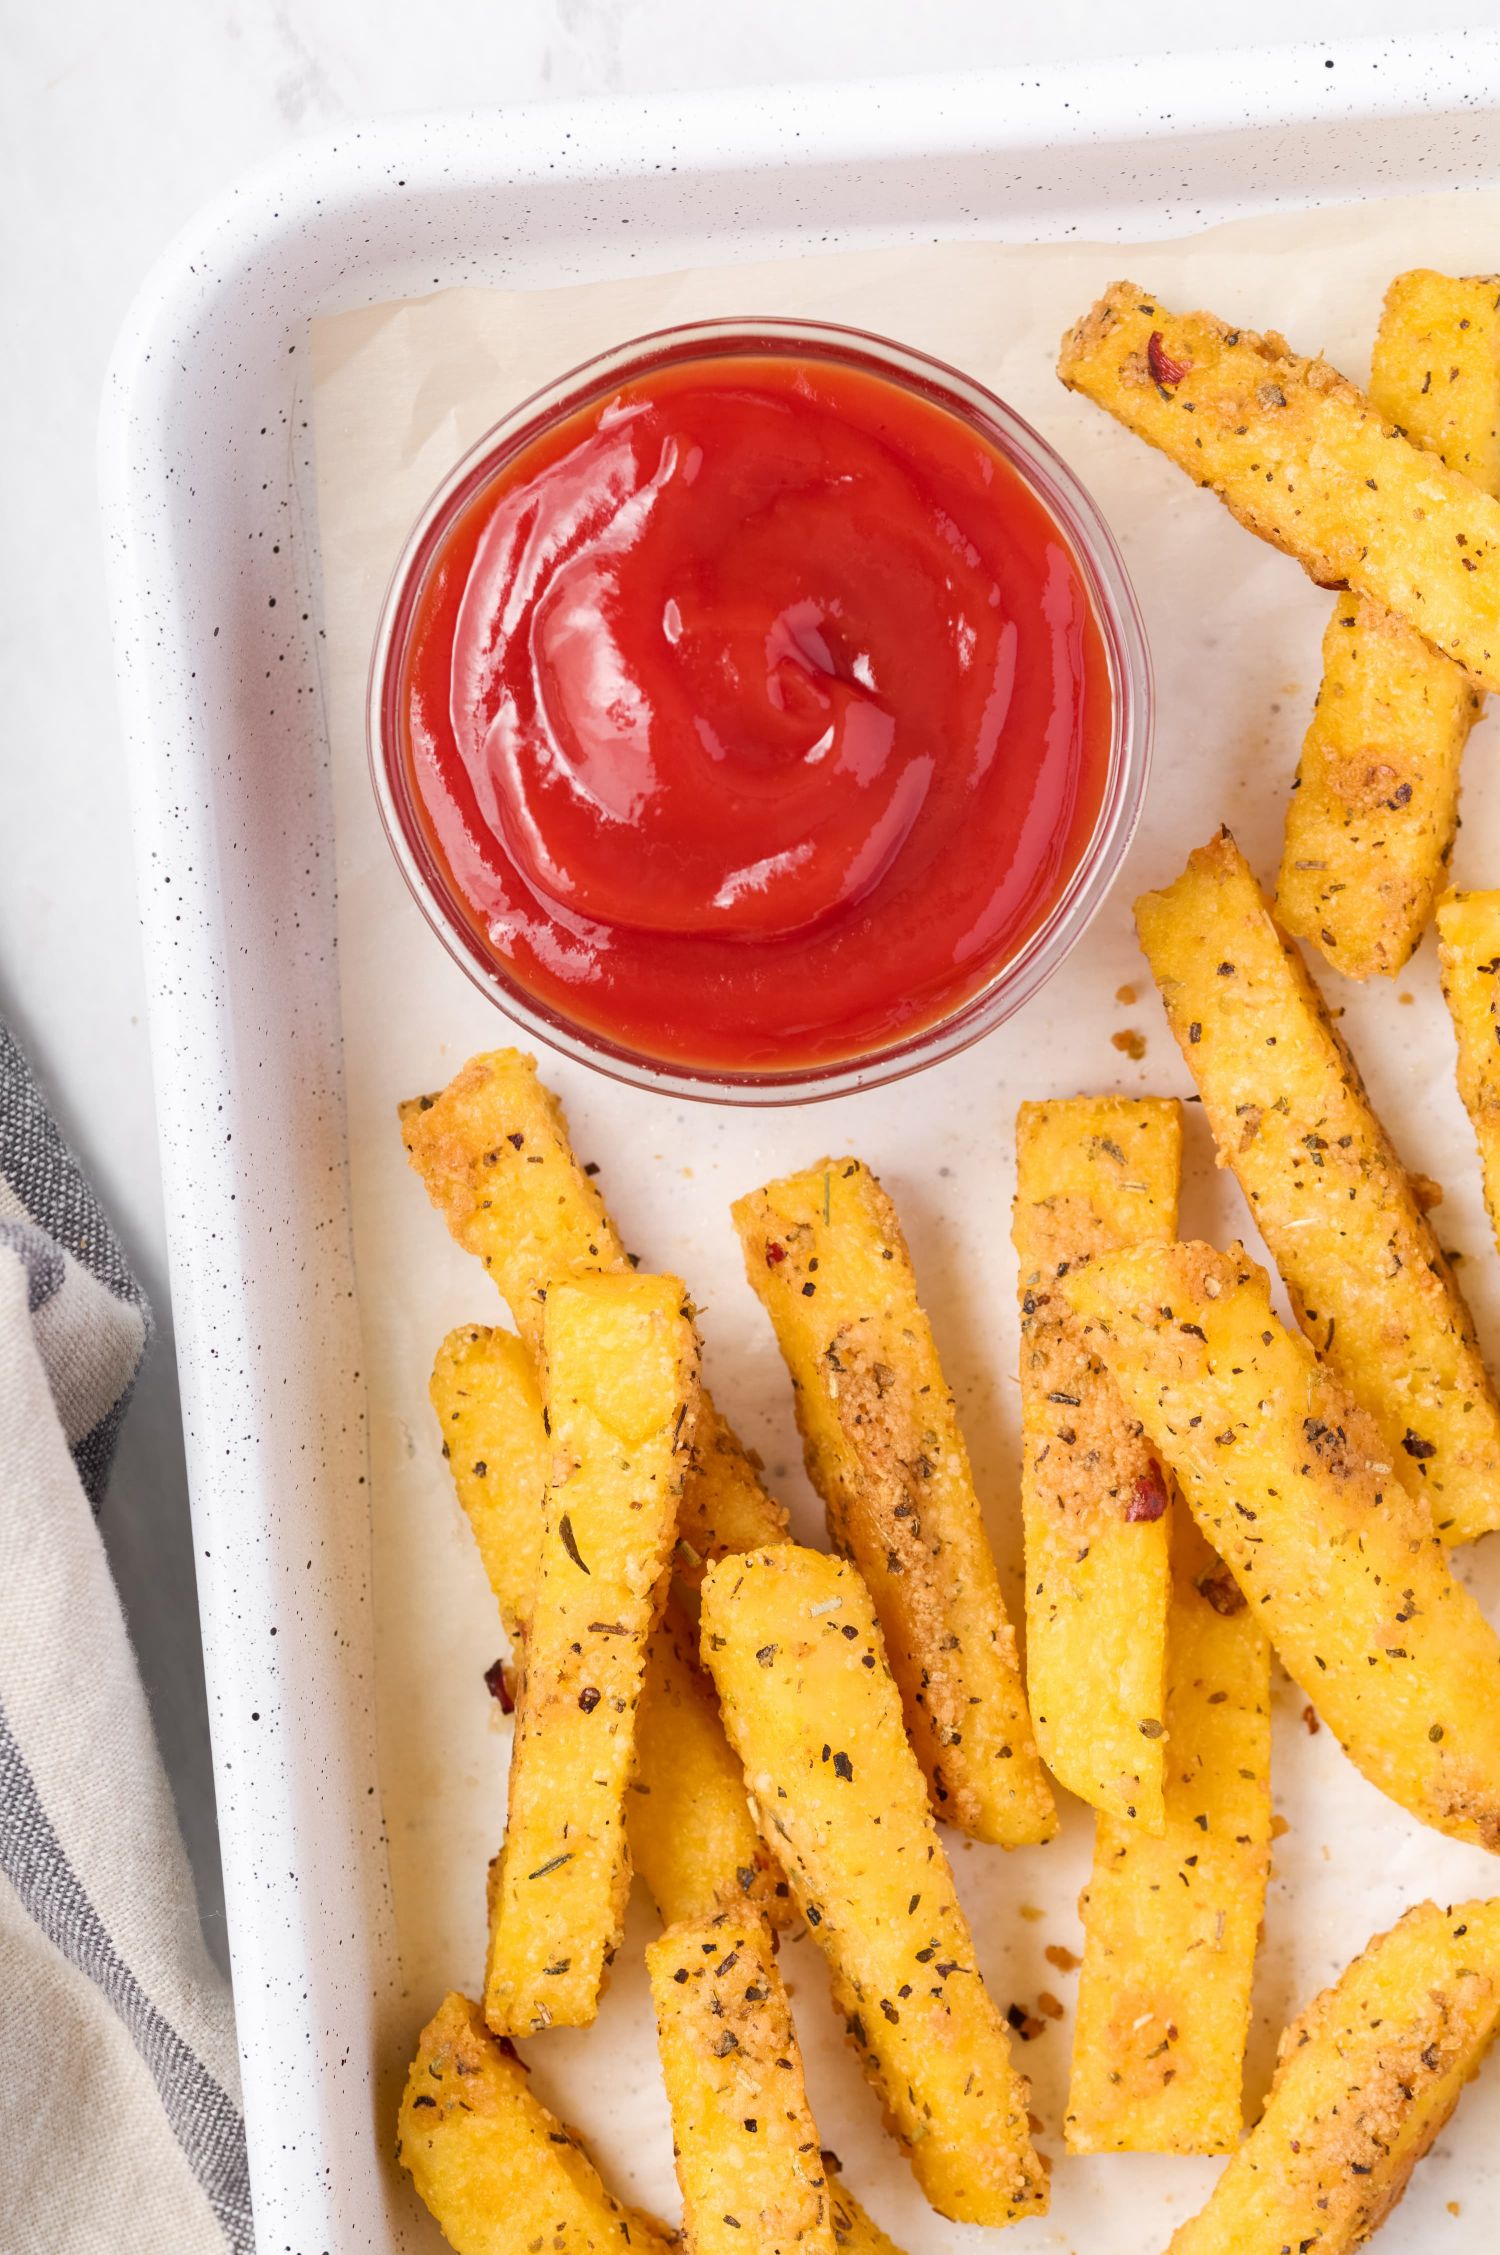 Oven baked polenta fries with crispy browned edges on a baking sheet with ketchup.